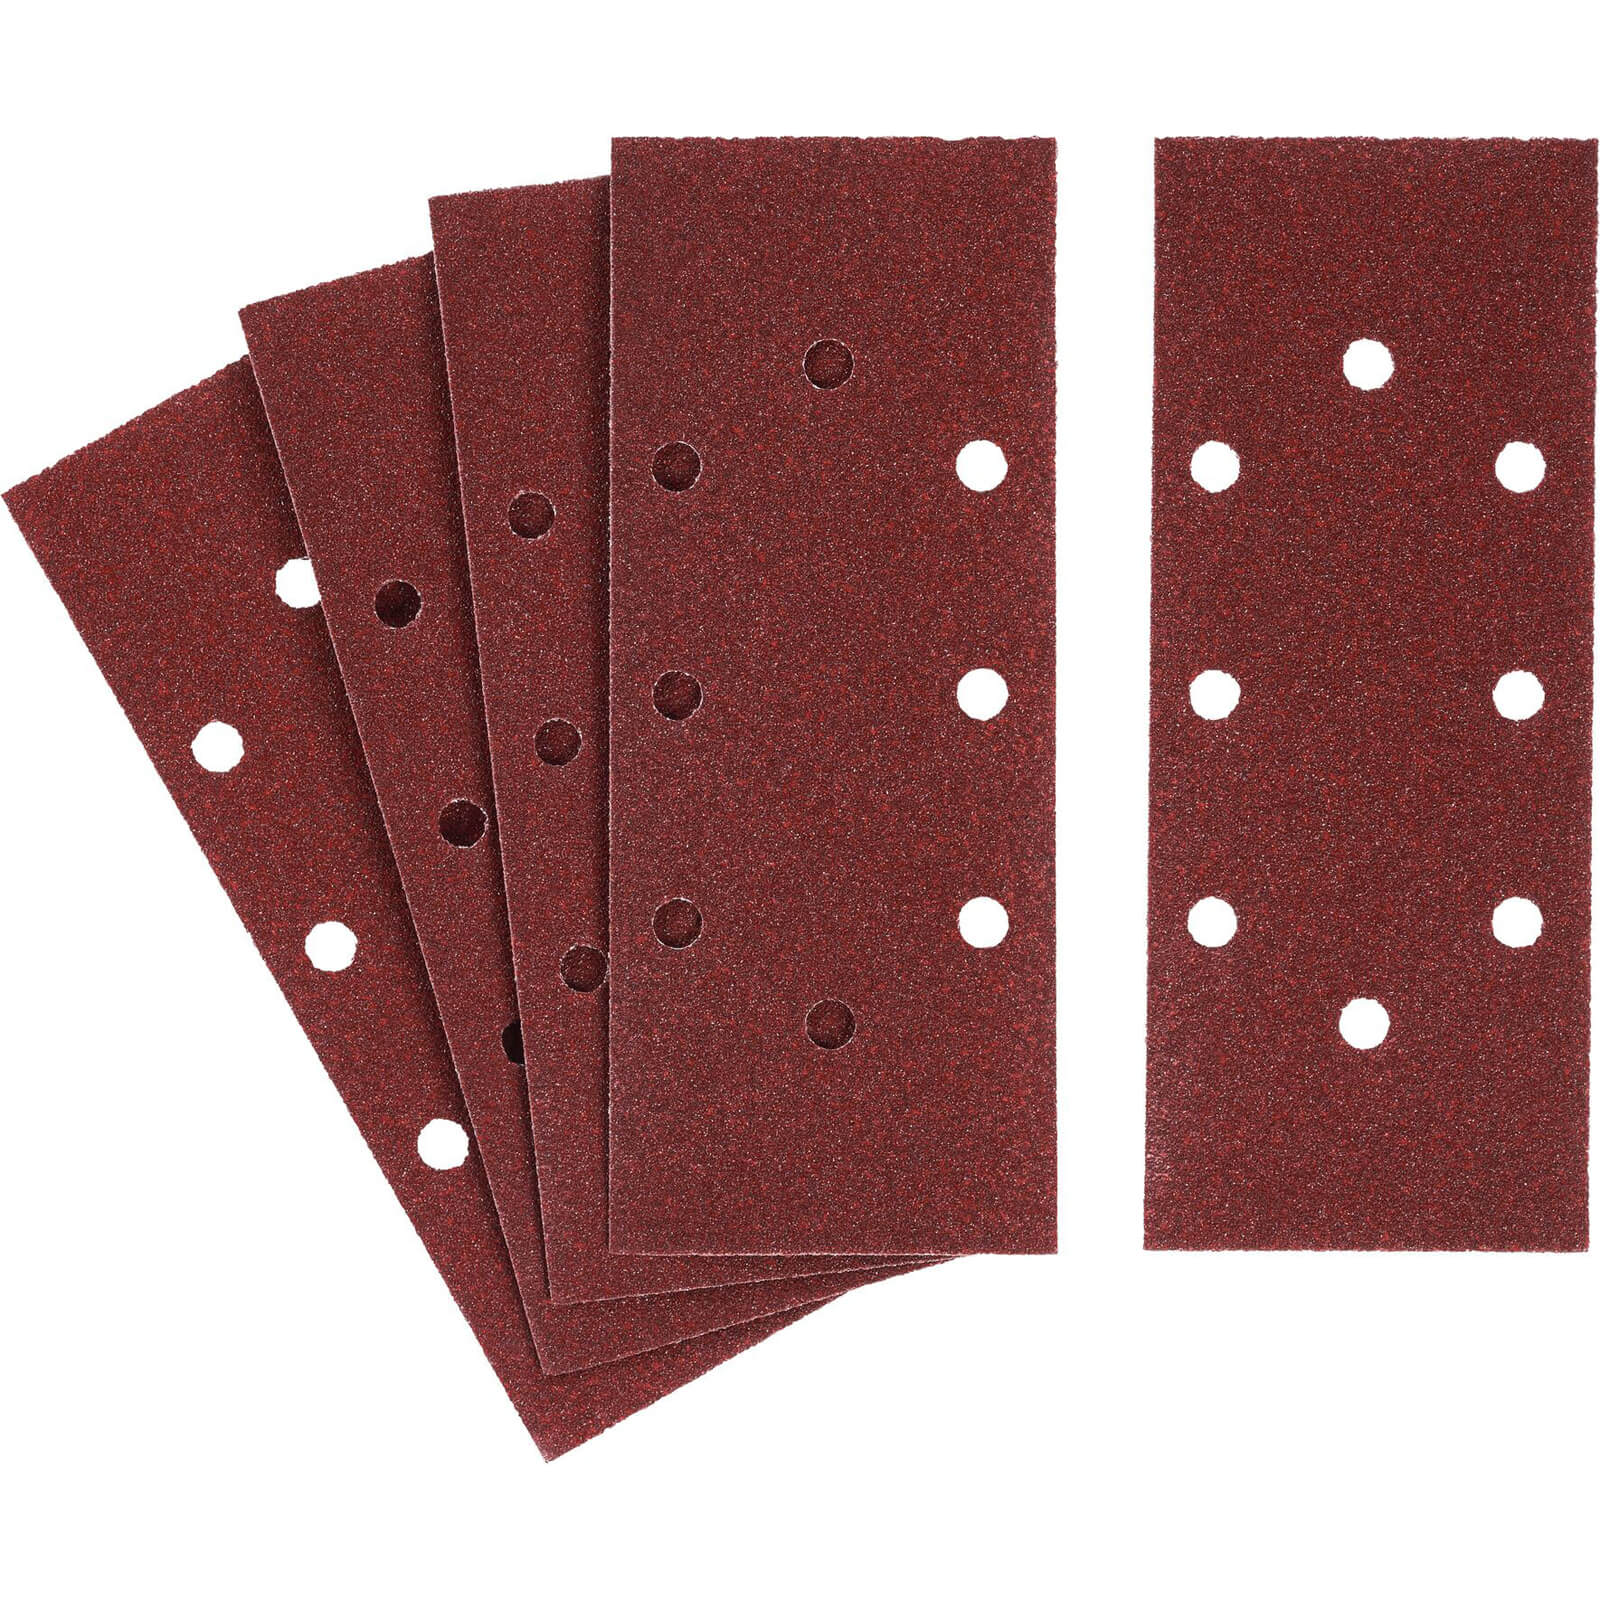 Photos - Abrasive Wheel / Belt Stanley Punched Clip On 1/3 Sanding Sheets 93mm x 230mm 60g Pack of 5 STA3 